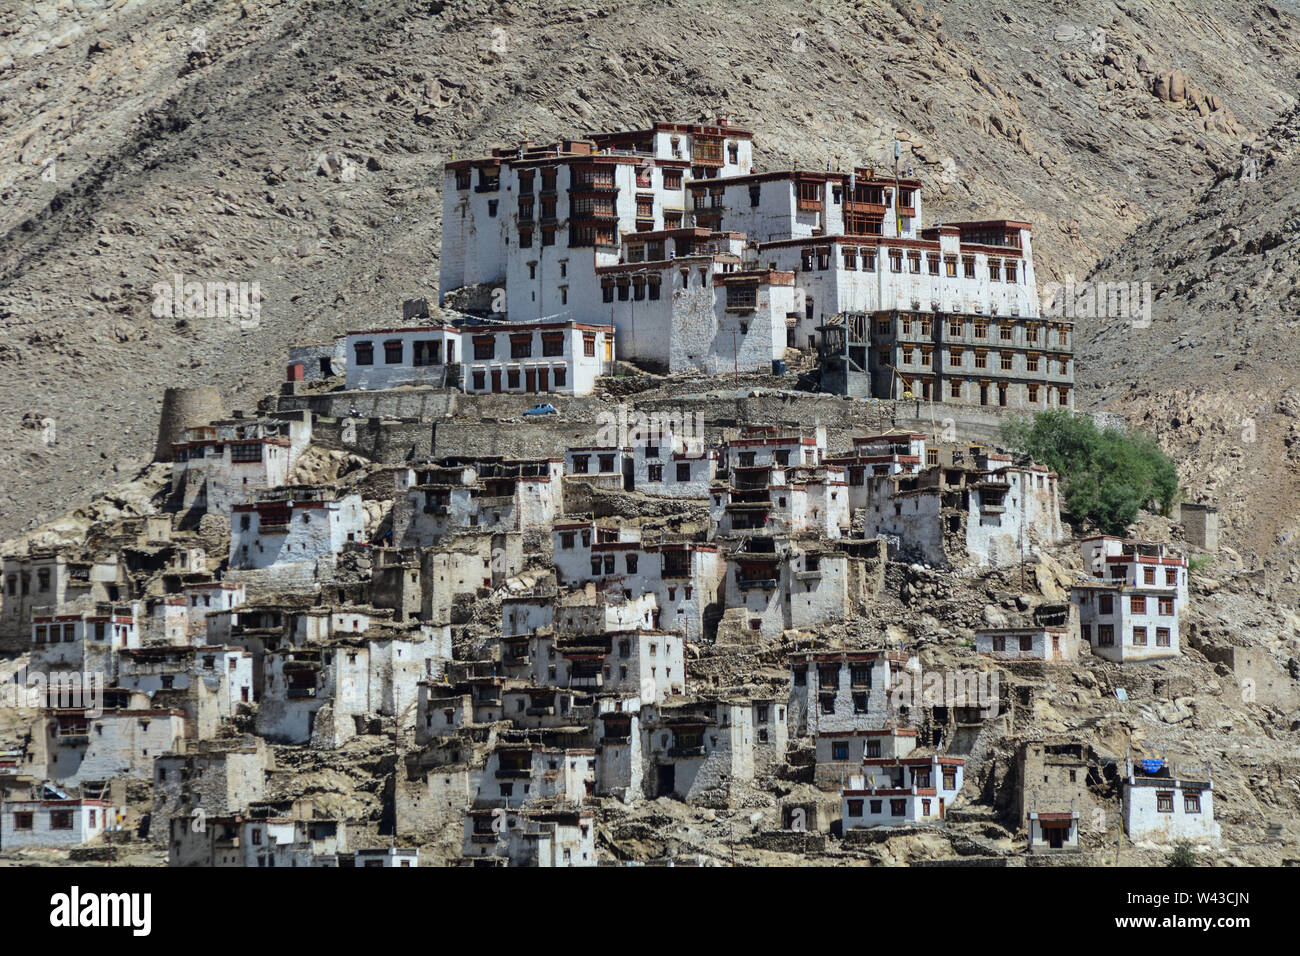 Thiksey Gompa in Ladakh, India. The Monastery is noted for its resemblance to the Potala Palace in Lhasa, Tibet and is the largest gompa in central La Stock Photo